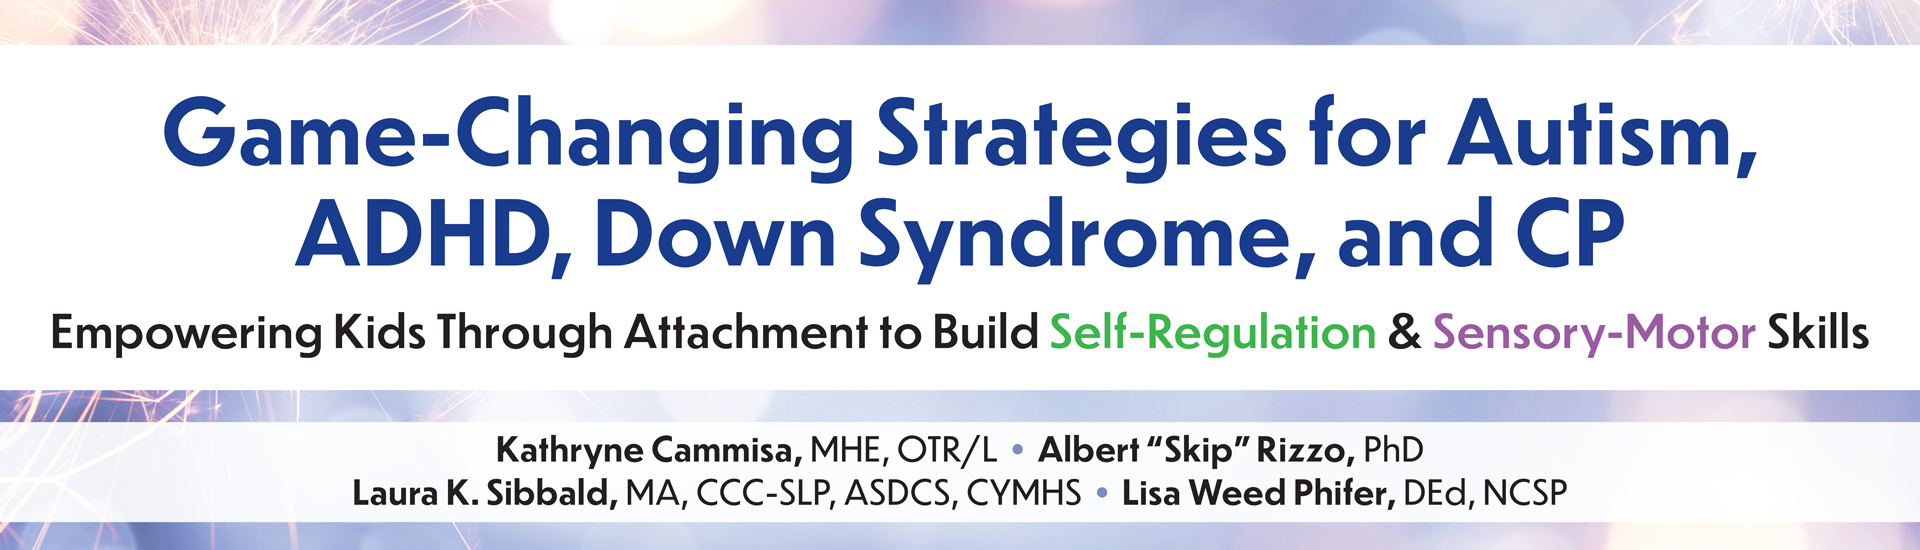 Game-Changing Strategies for Autism, ADHD, Down Syndrome, and CP: Empowering Kids Through Attachment to Build Self-Regulation & Sensory-Motor Skills